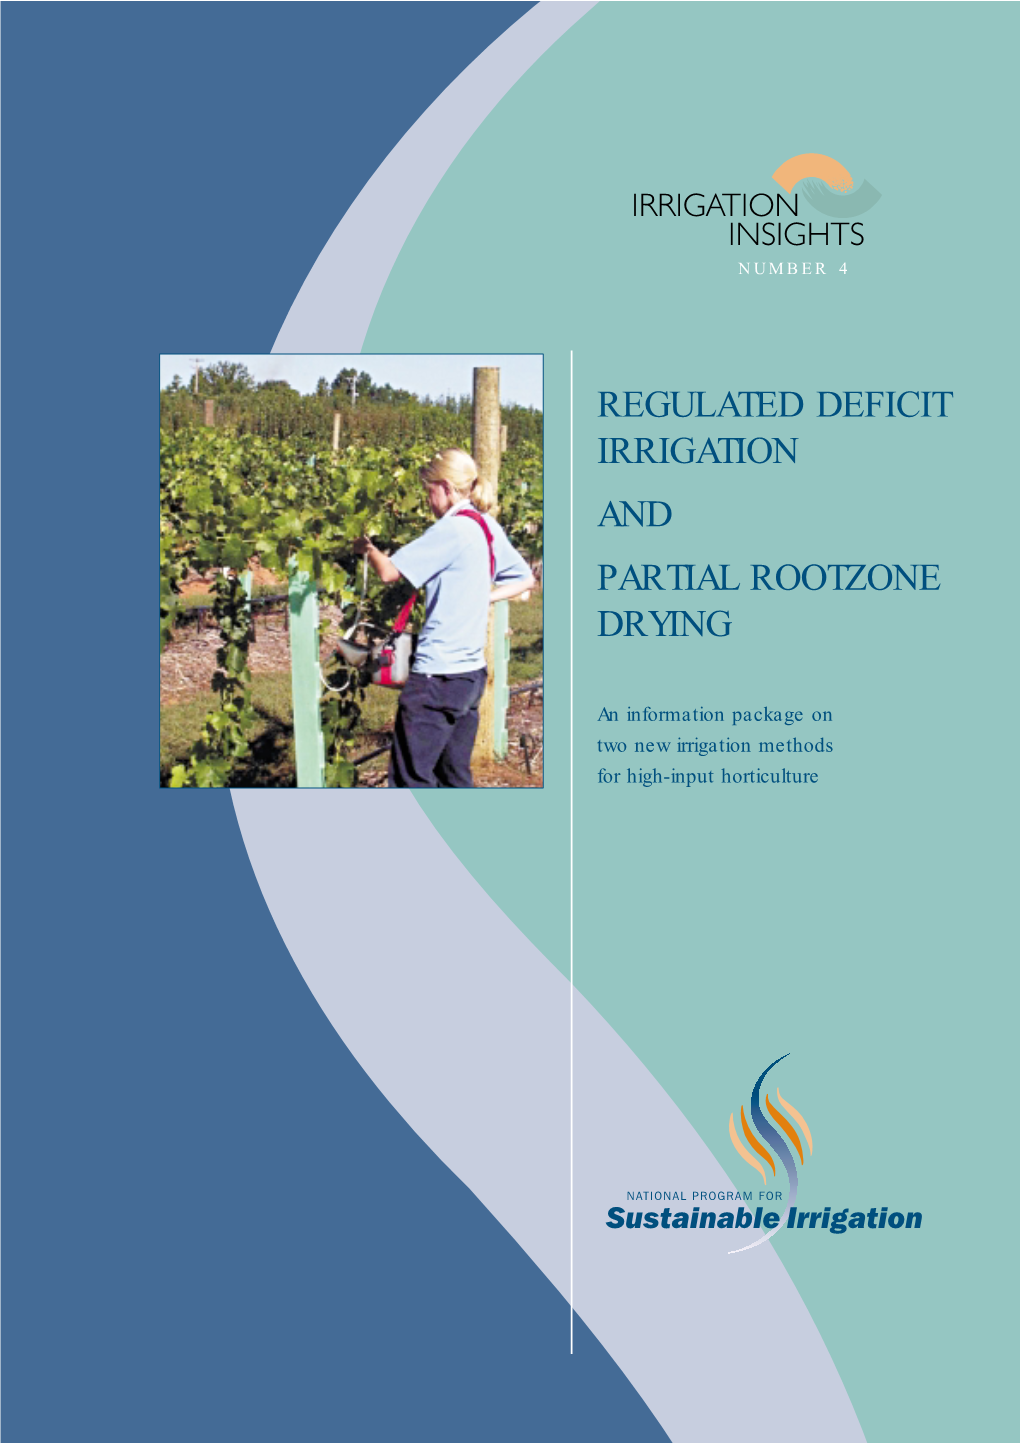 Regulated Deficit Irrigation and Partial Rootzone Drying